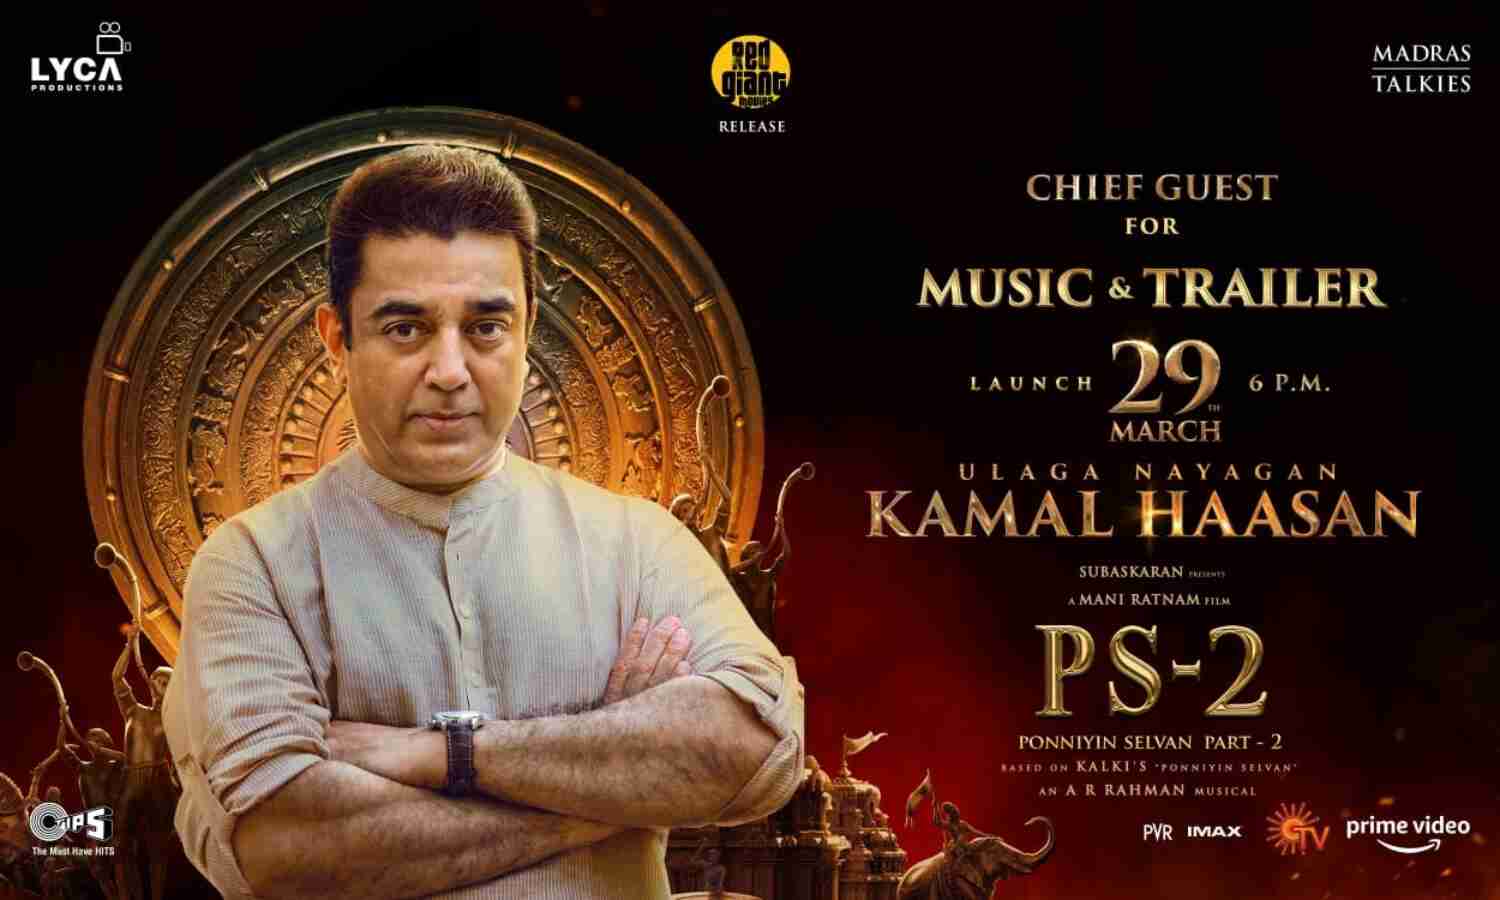 Kamal to grace audio launch and release PS-2 trailer on March 29